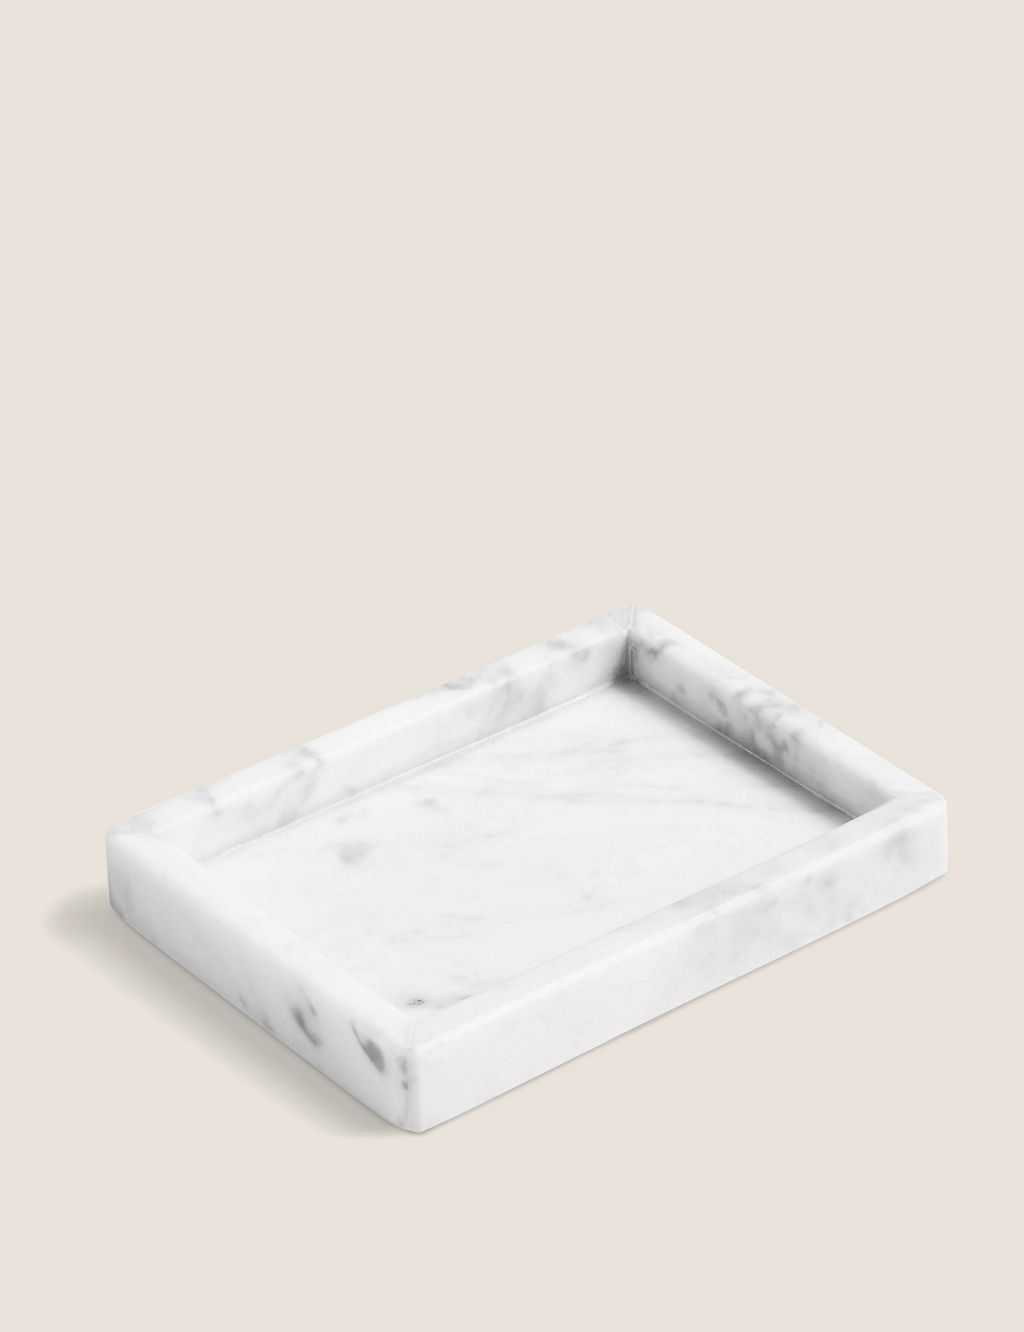 Marble Soap Dish 1 of 2